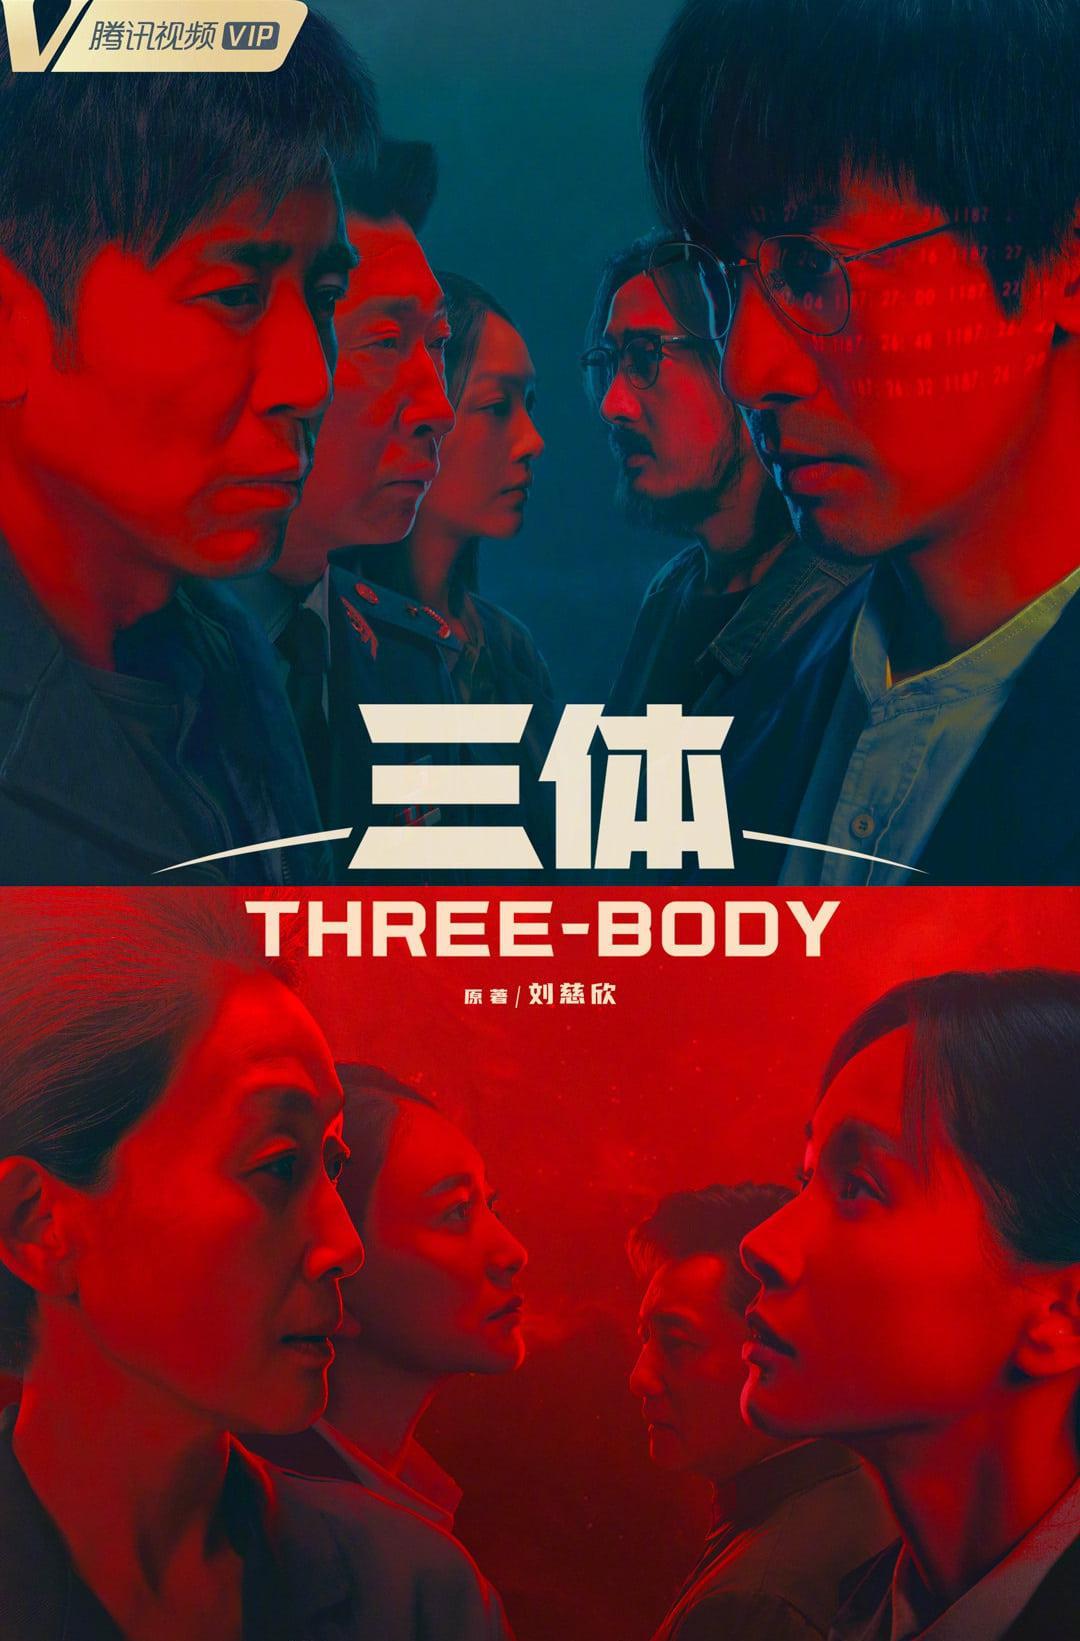 TV ratings for Three-Body (三体) in Denmark. Tencent Video TV series